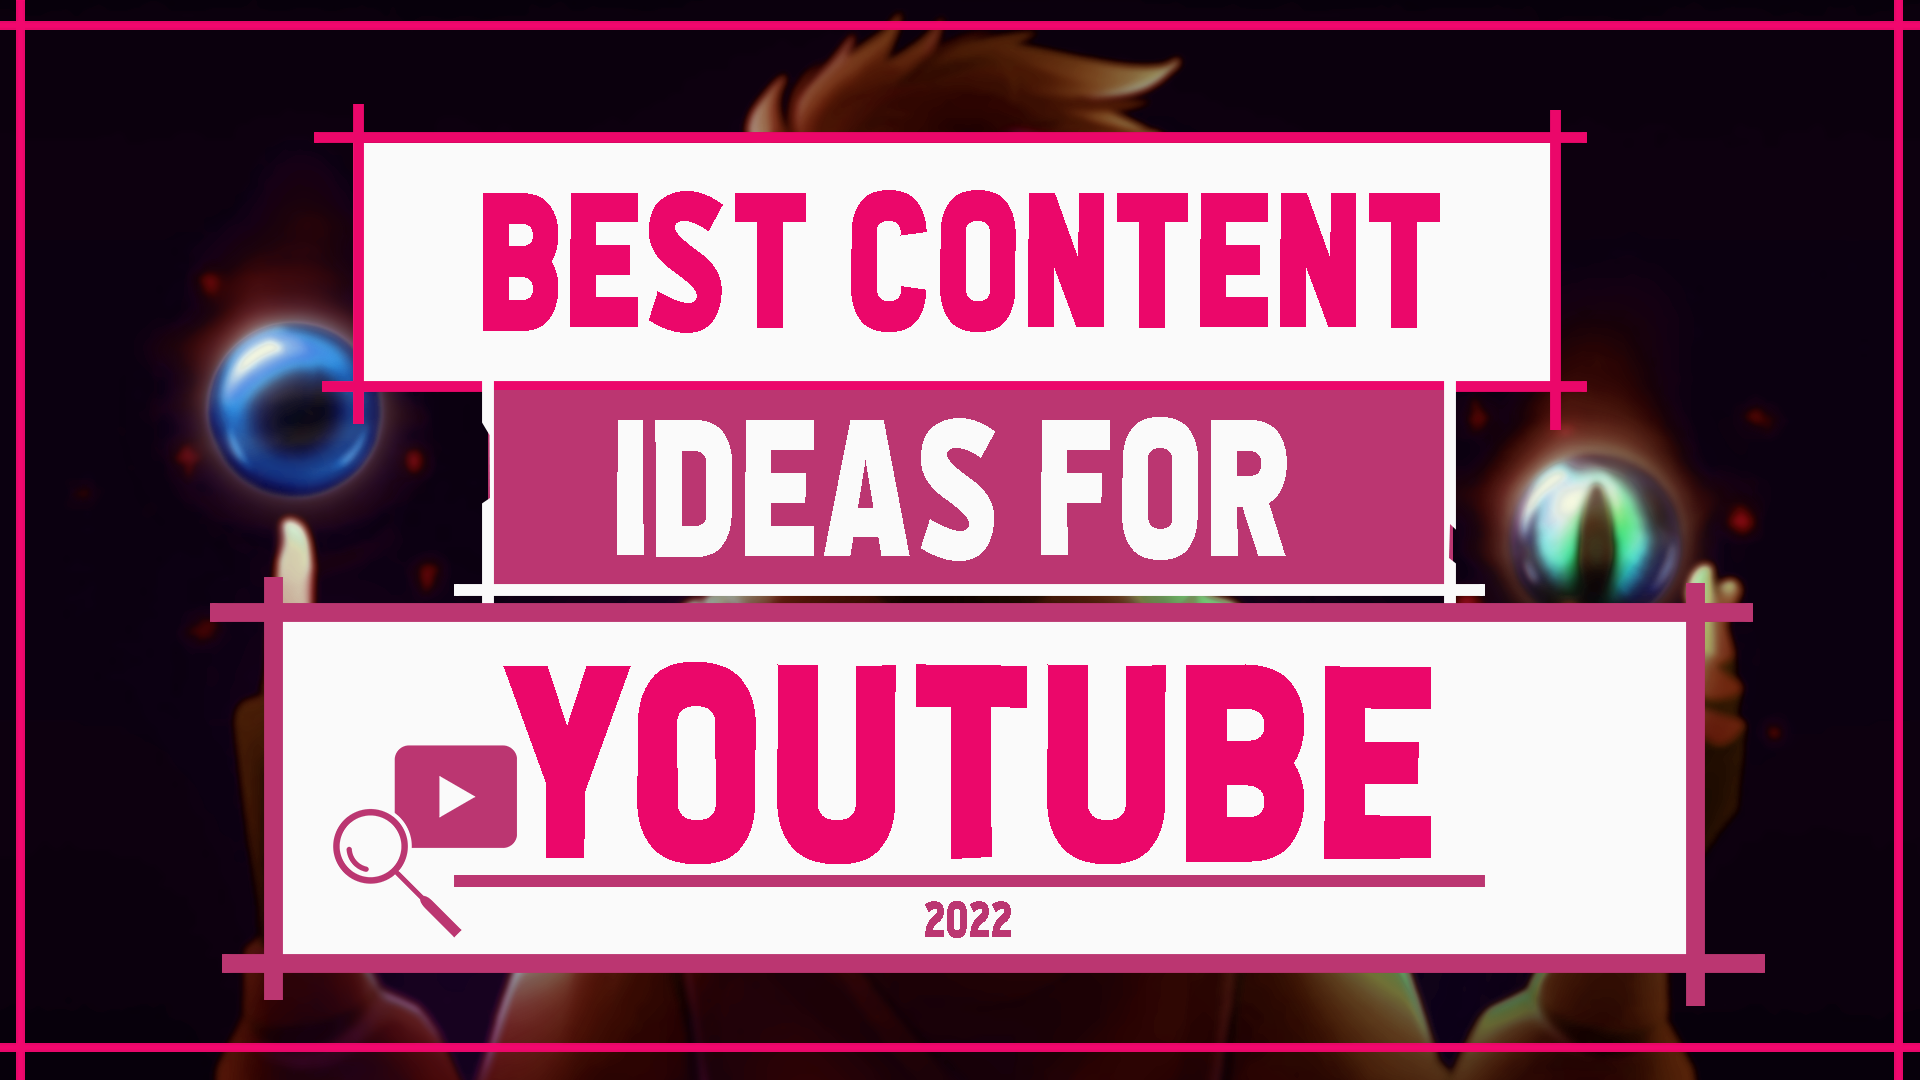 Best Content Ideas For Youtube in 2022